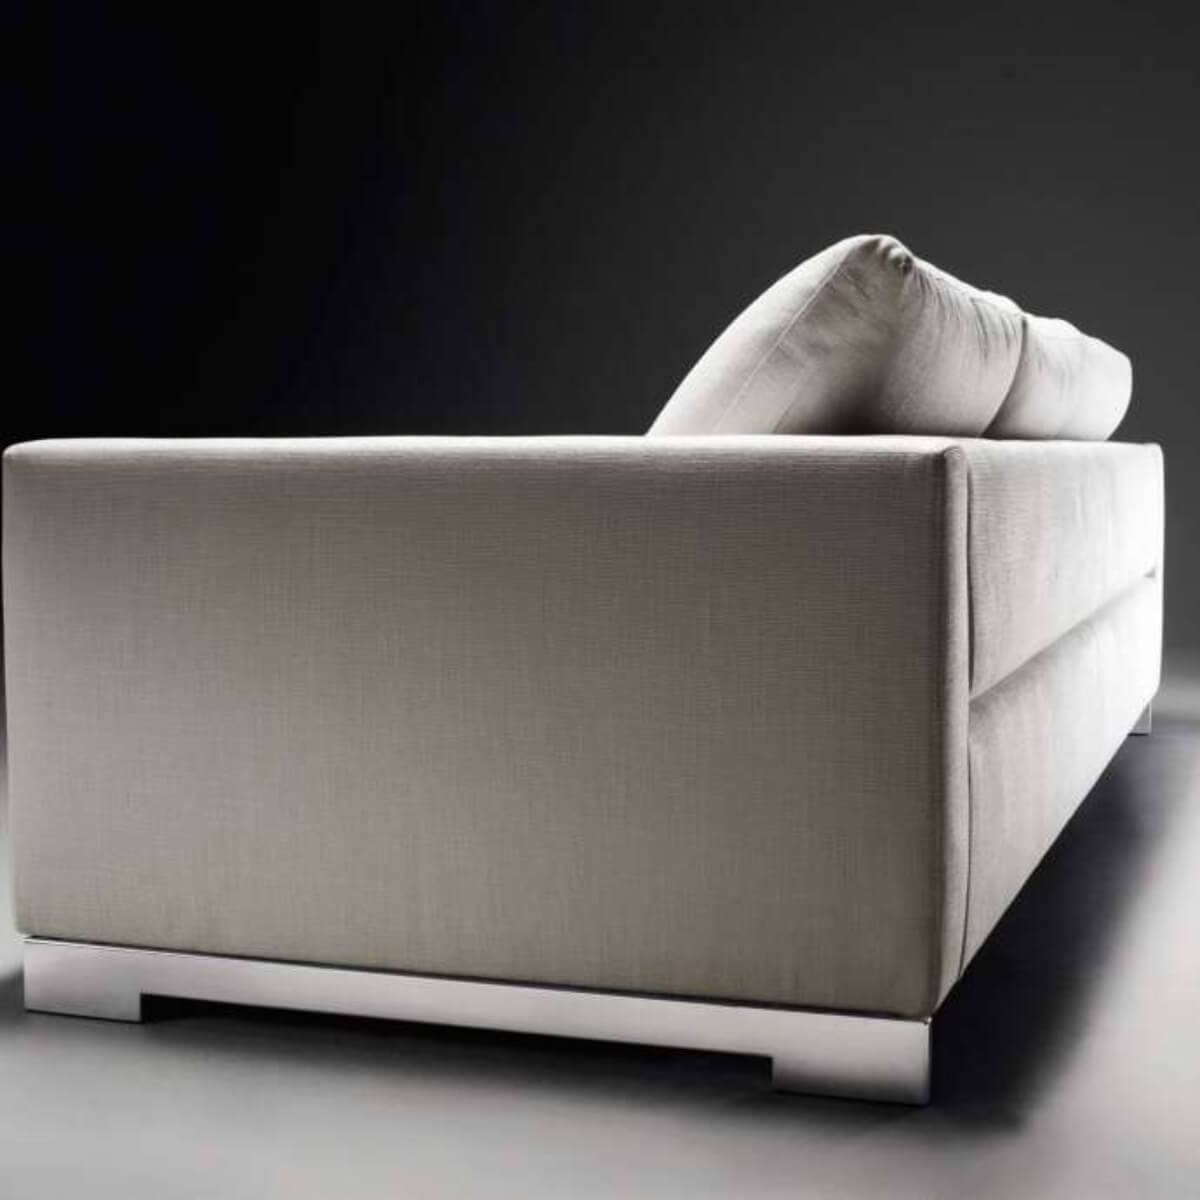 RadiantRelaxation Sofa: Your Sanctuary of Tranquility